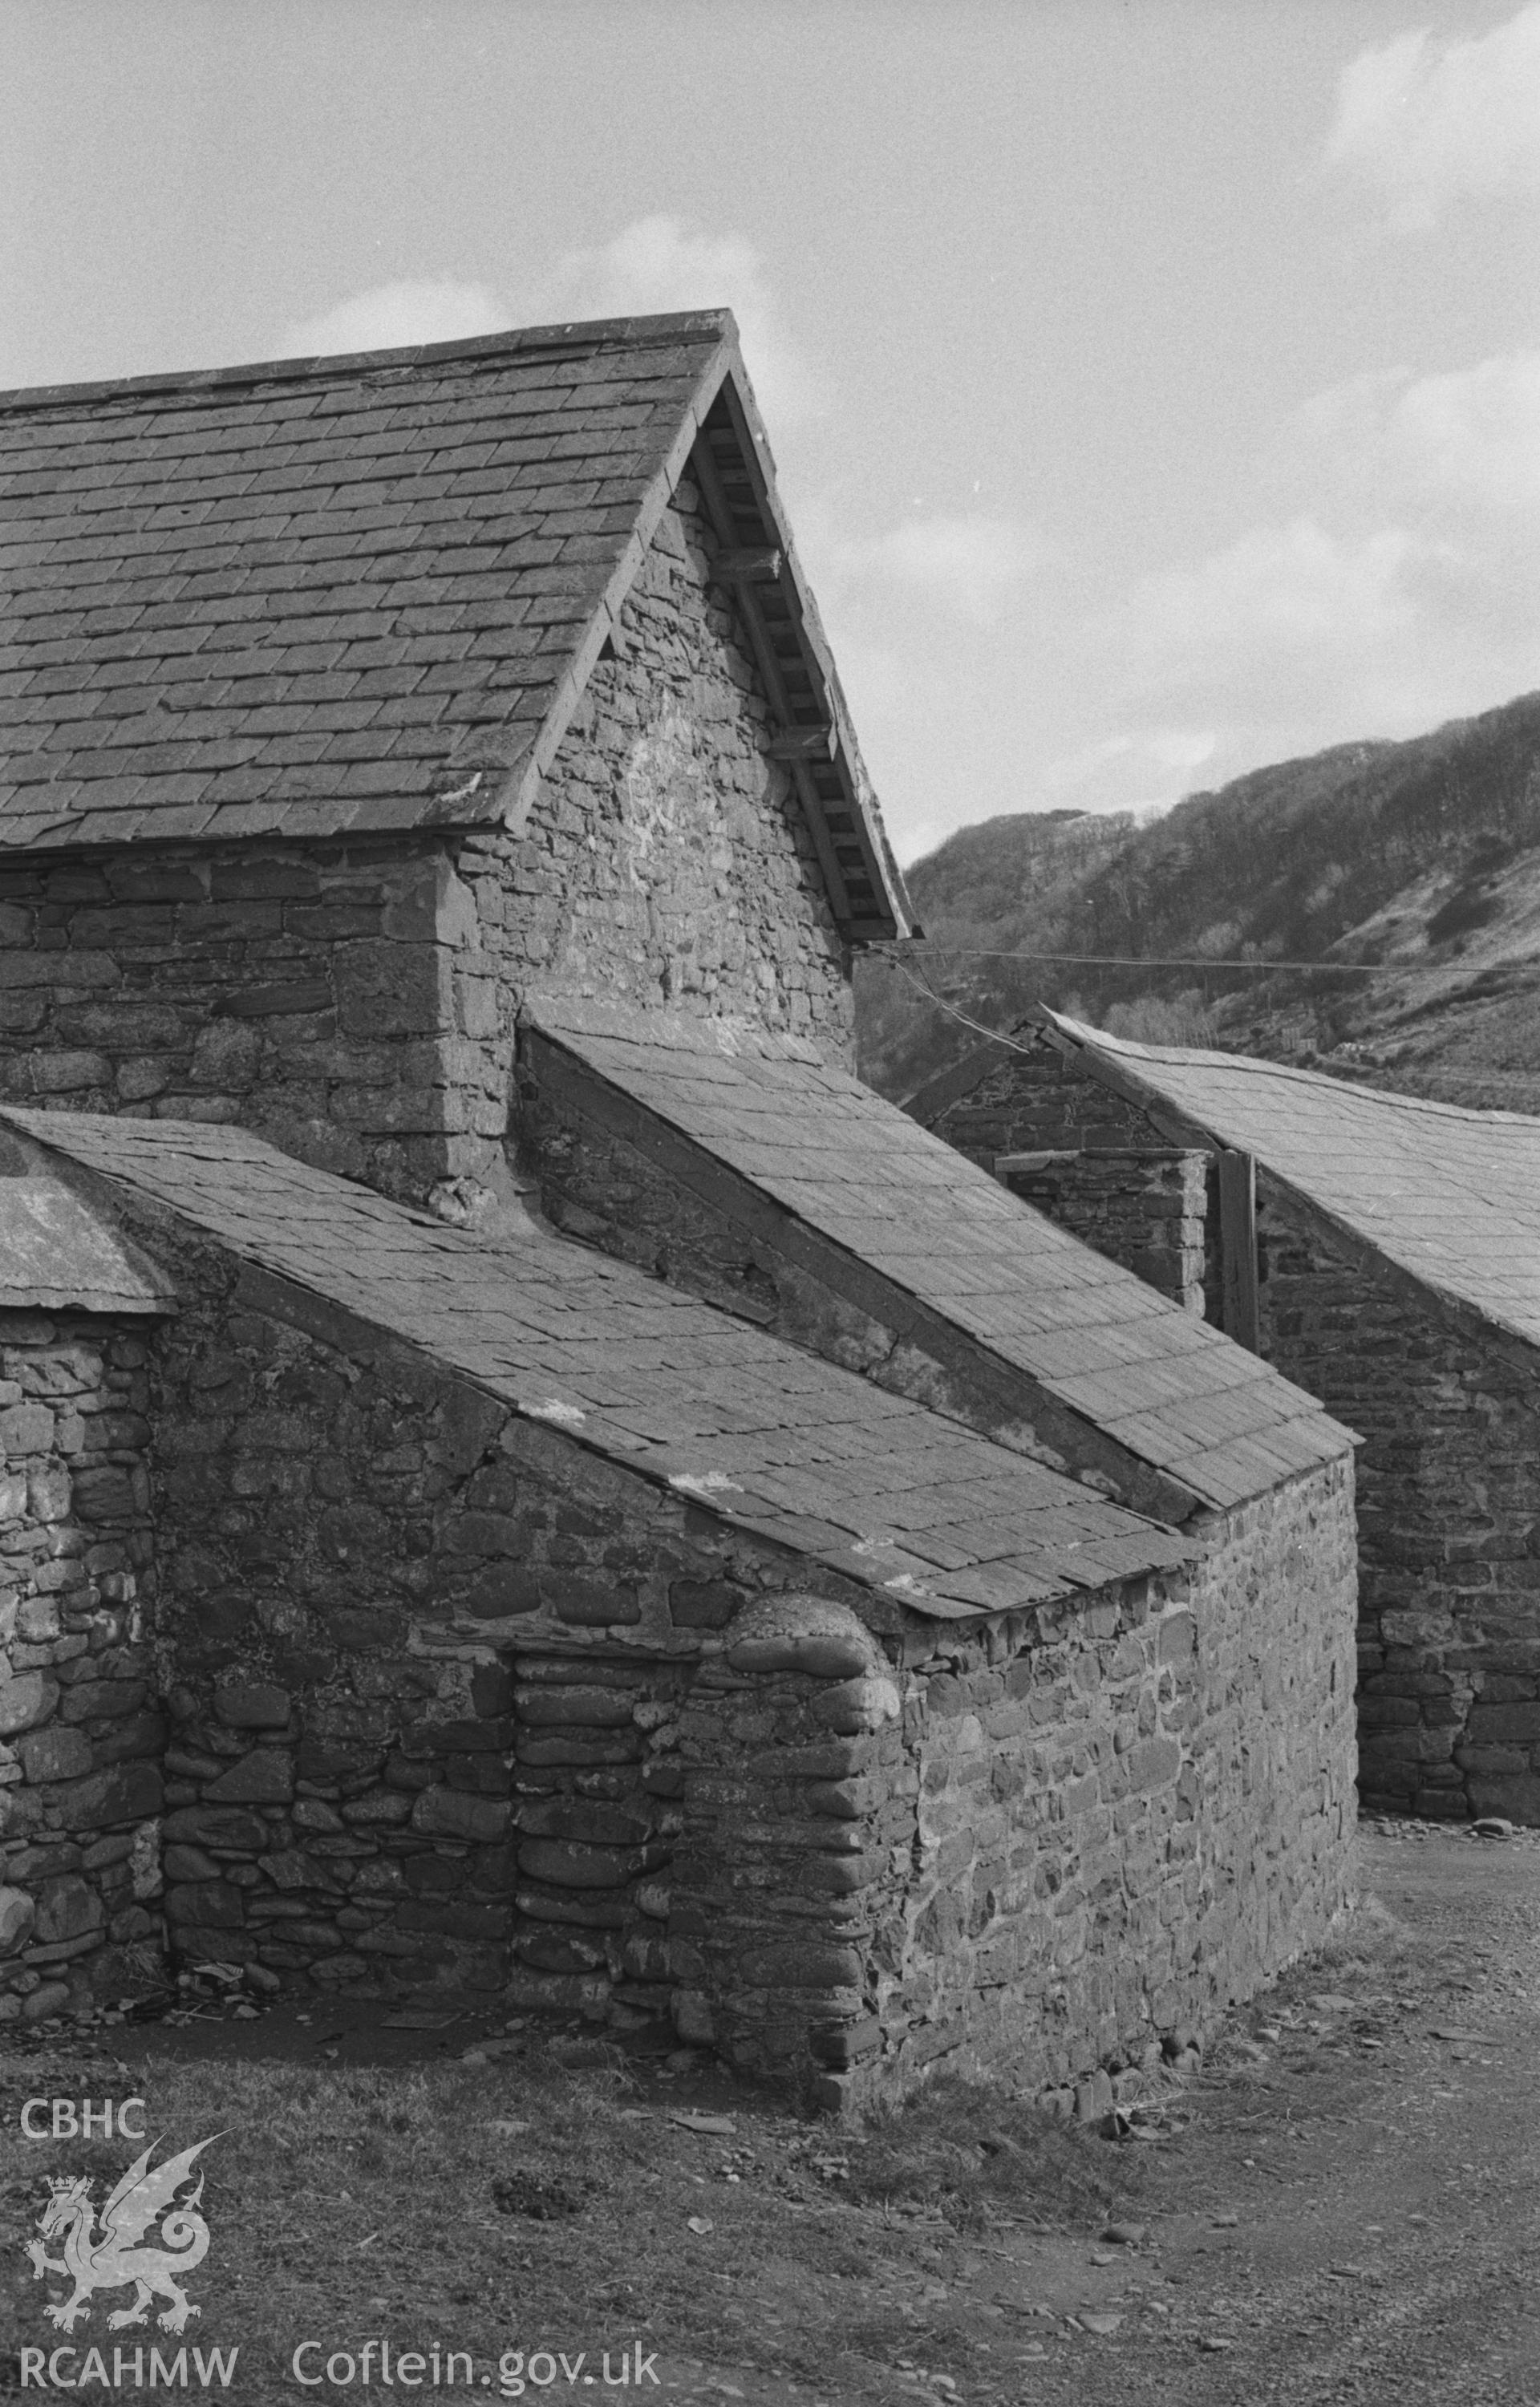 Digital copy of a black and white negative showing outhouses at seaward side of Glan-y-Mor farm near Clarach beach. Photographed by Arthur O. Chater on 2nd April 1968 looking south east from Grid Reference SN 586 841.